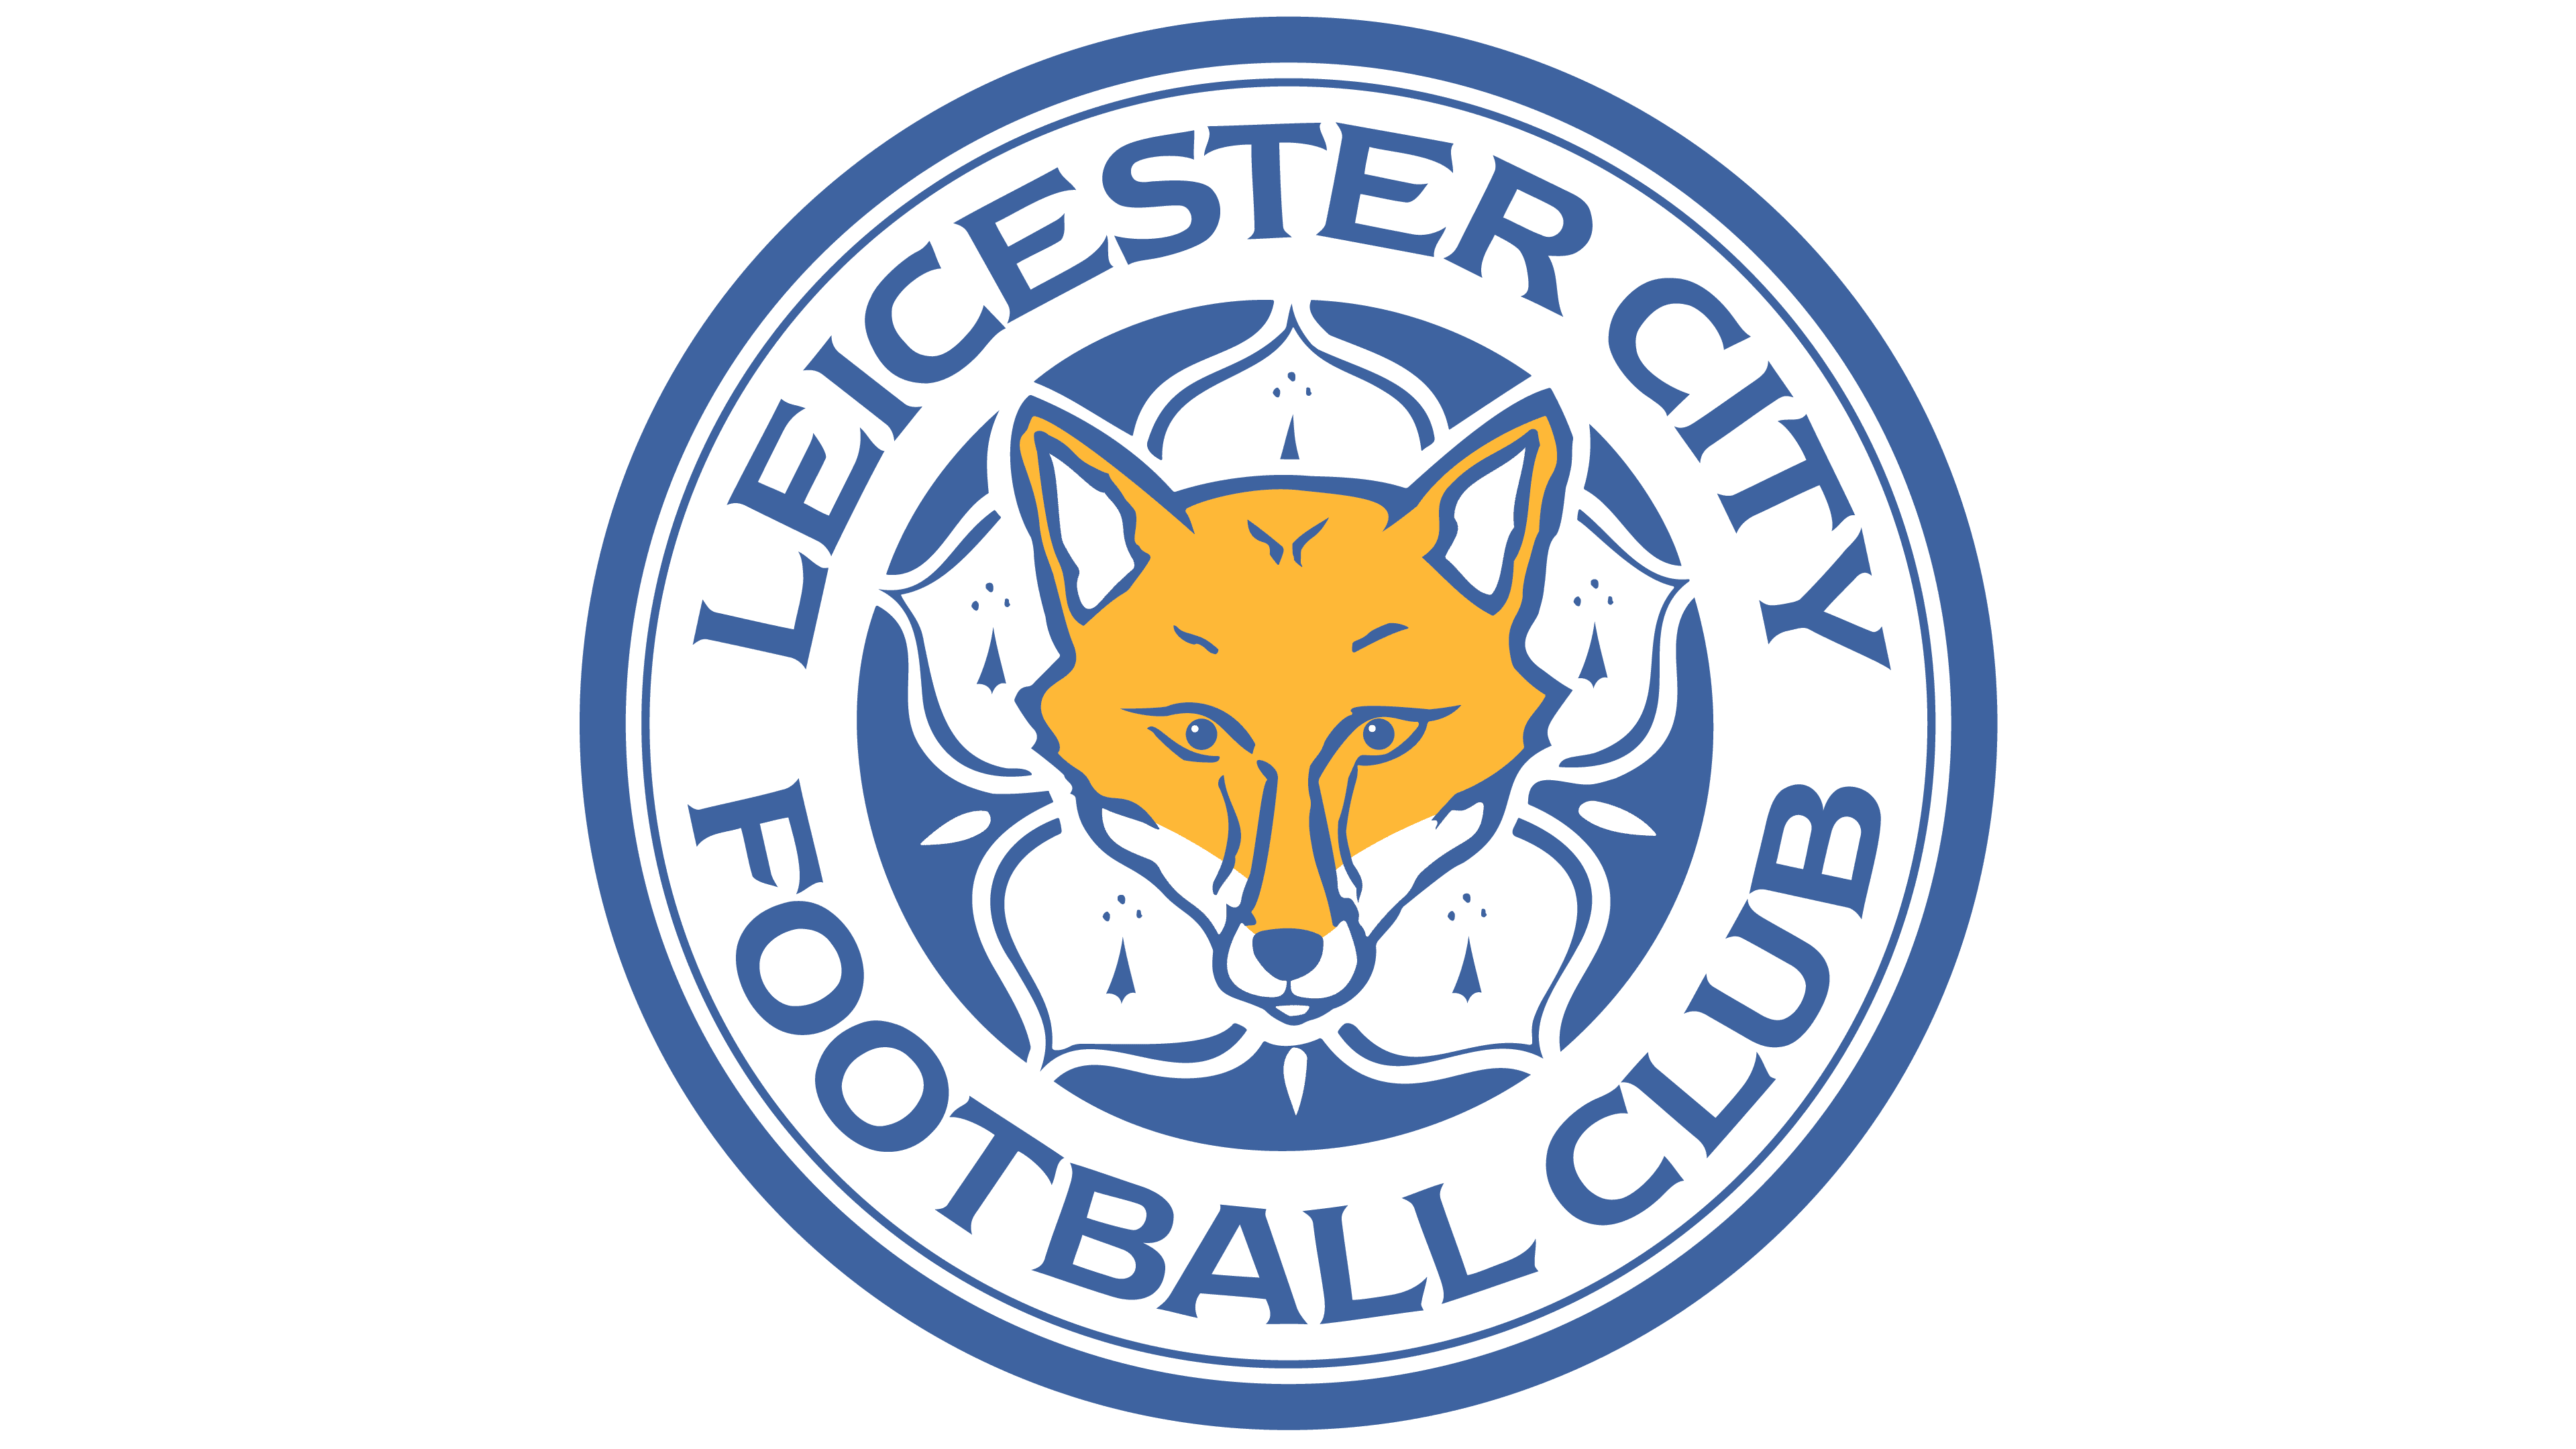 Leicester City Logo | The most famous brands and company ...